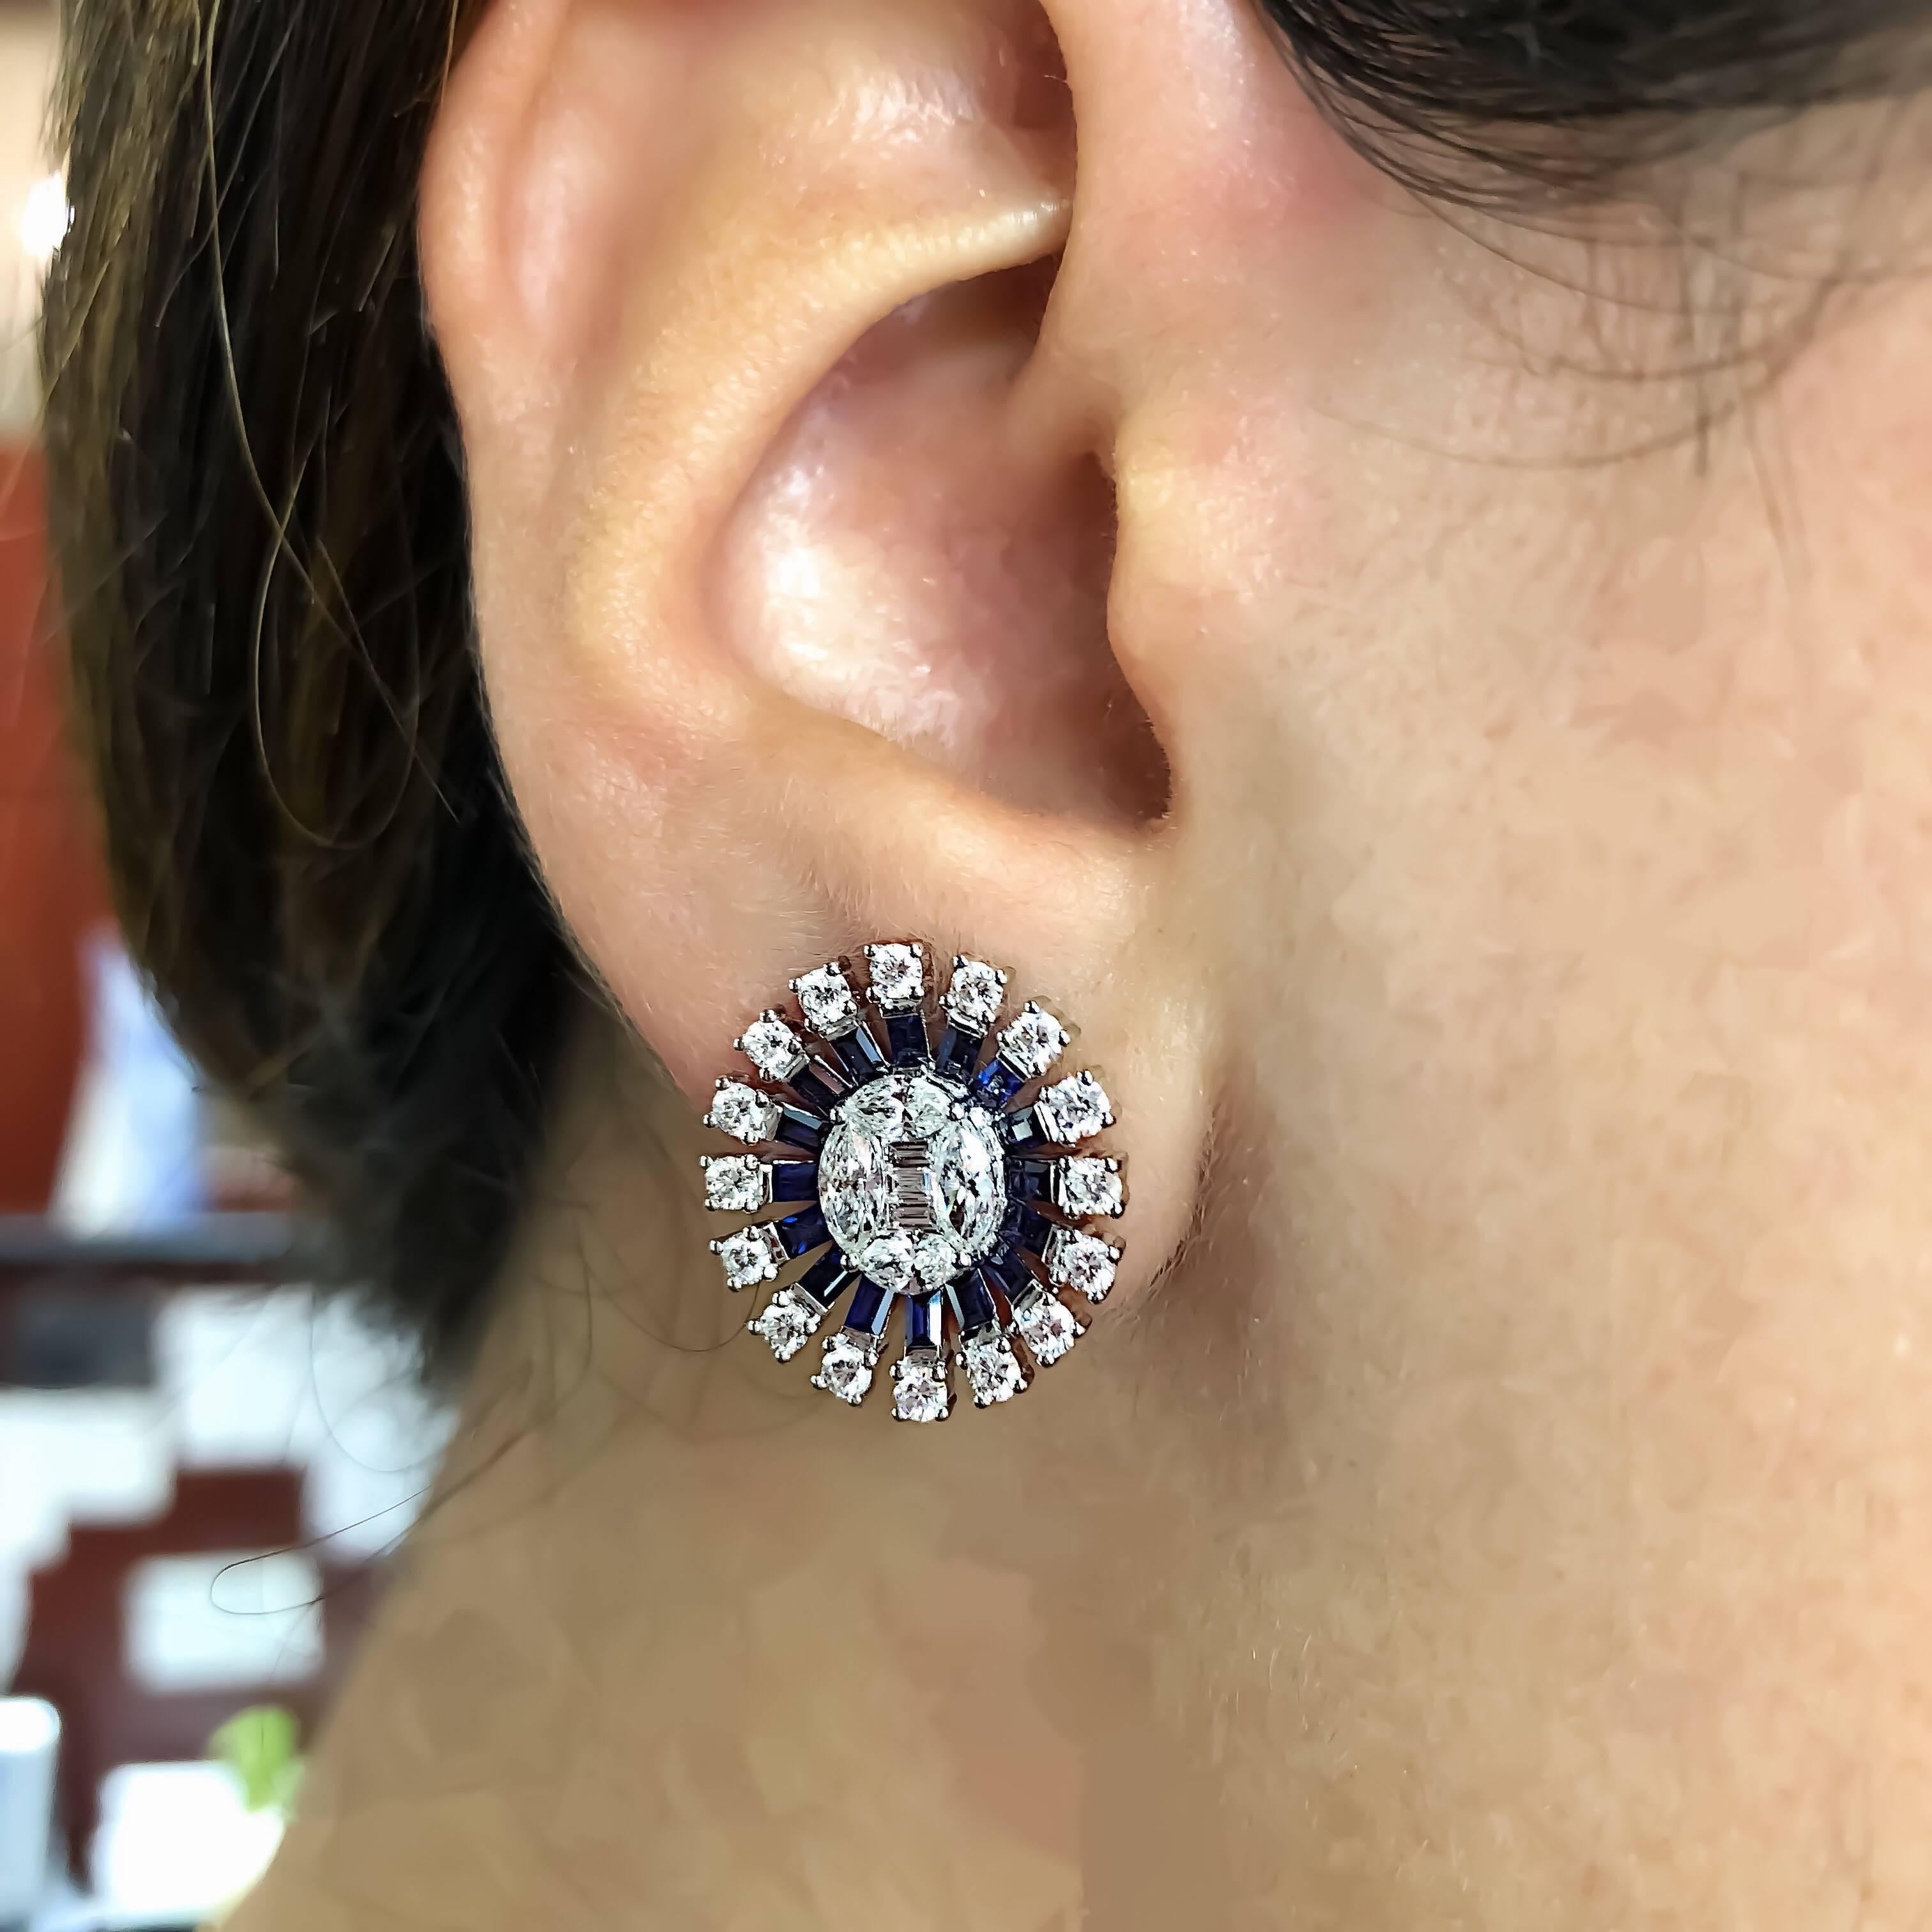 Contemporary 18 Karat Gold Oval Cluster Push-Back Earrings Diamond and Sapphire Gemstones